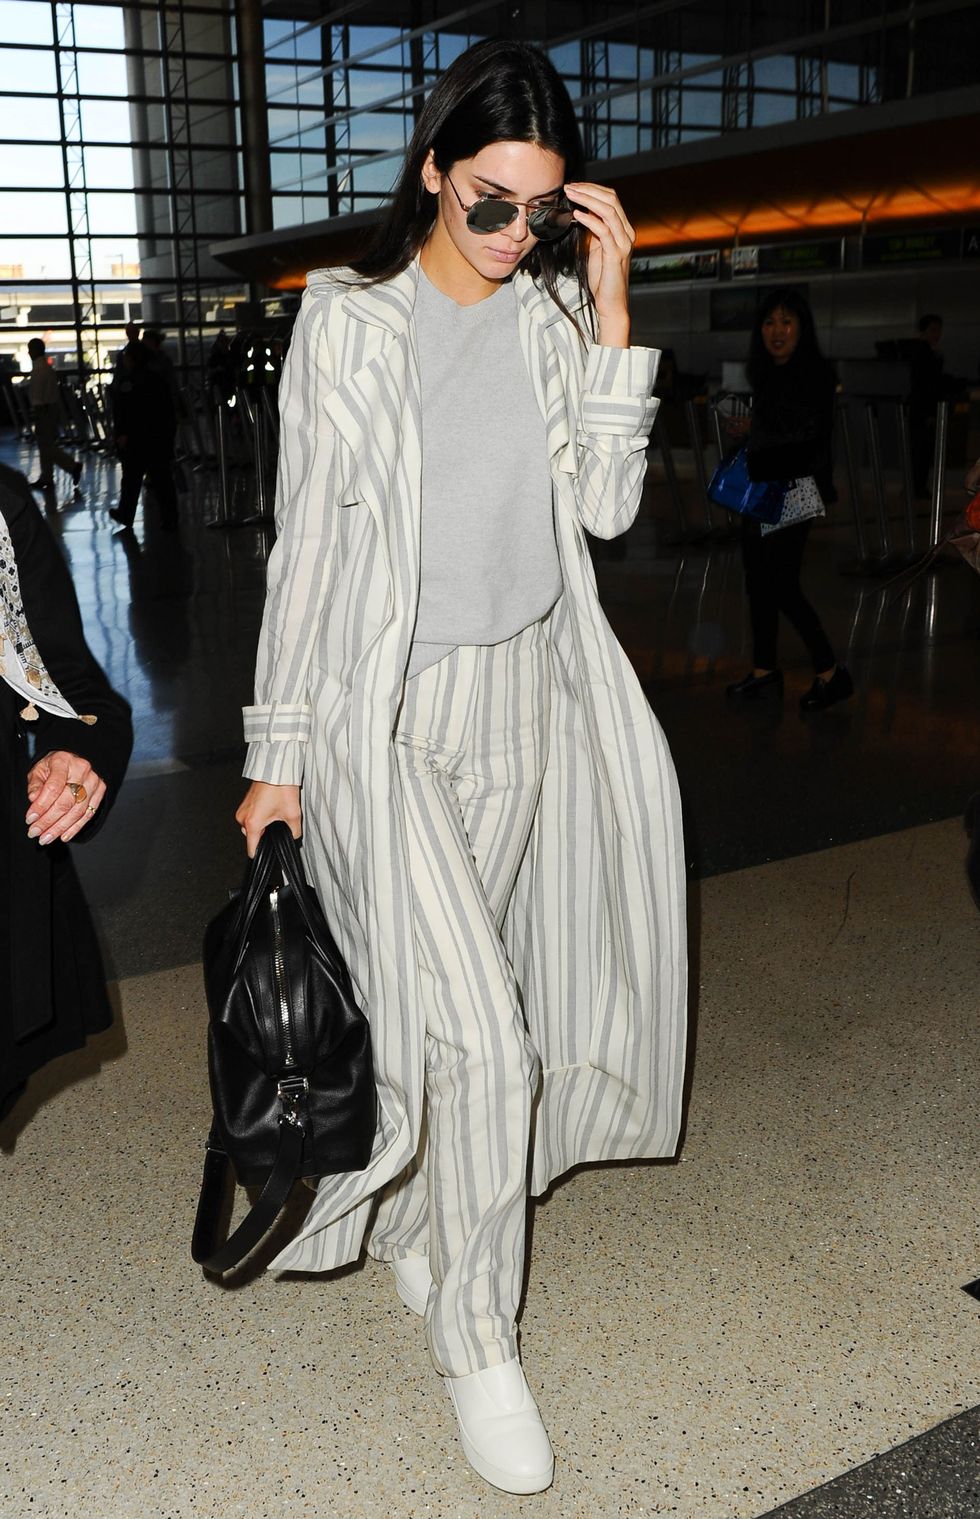 Kendall Jenner at the airport